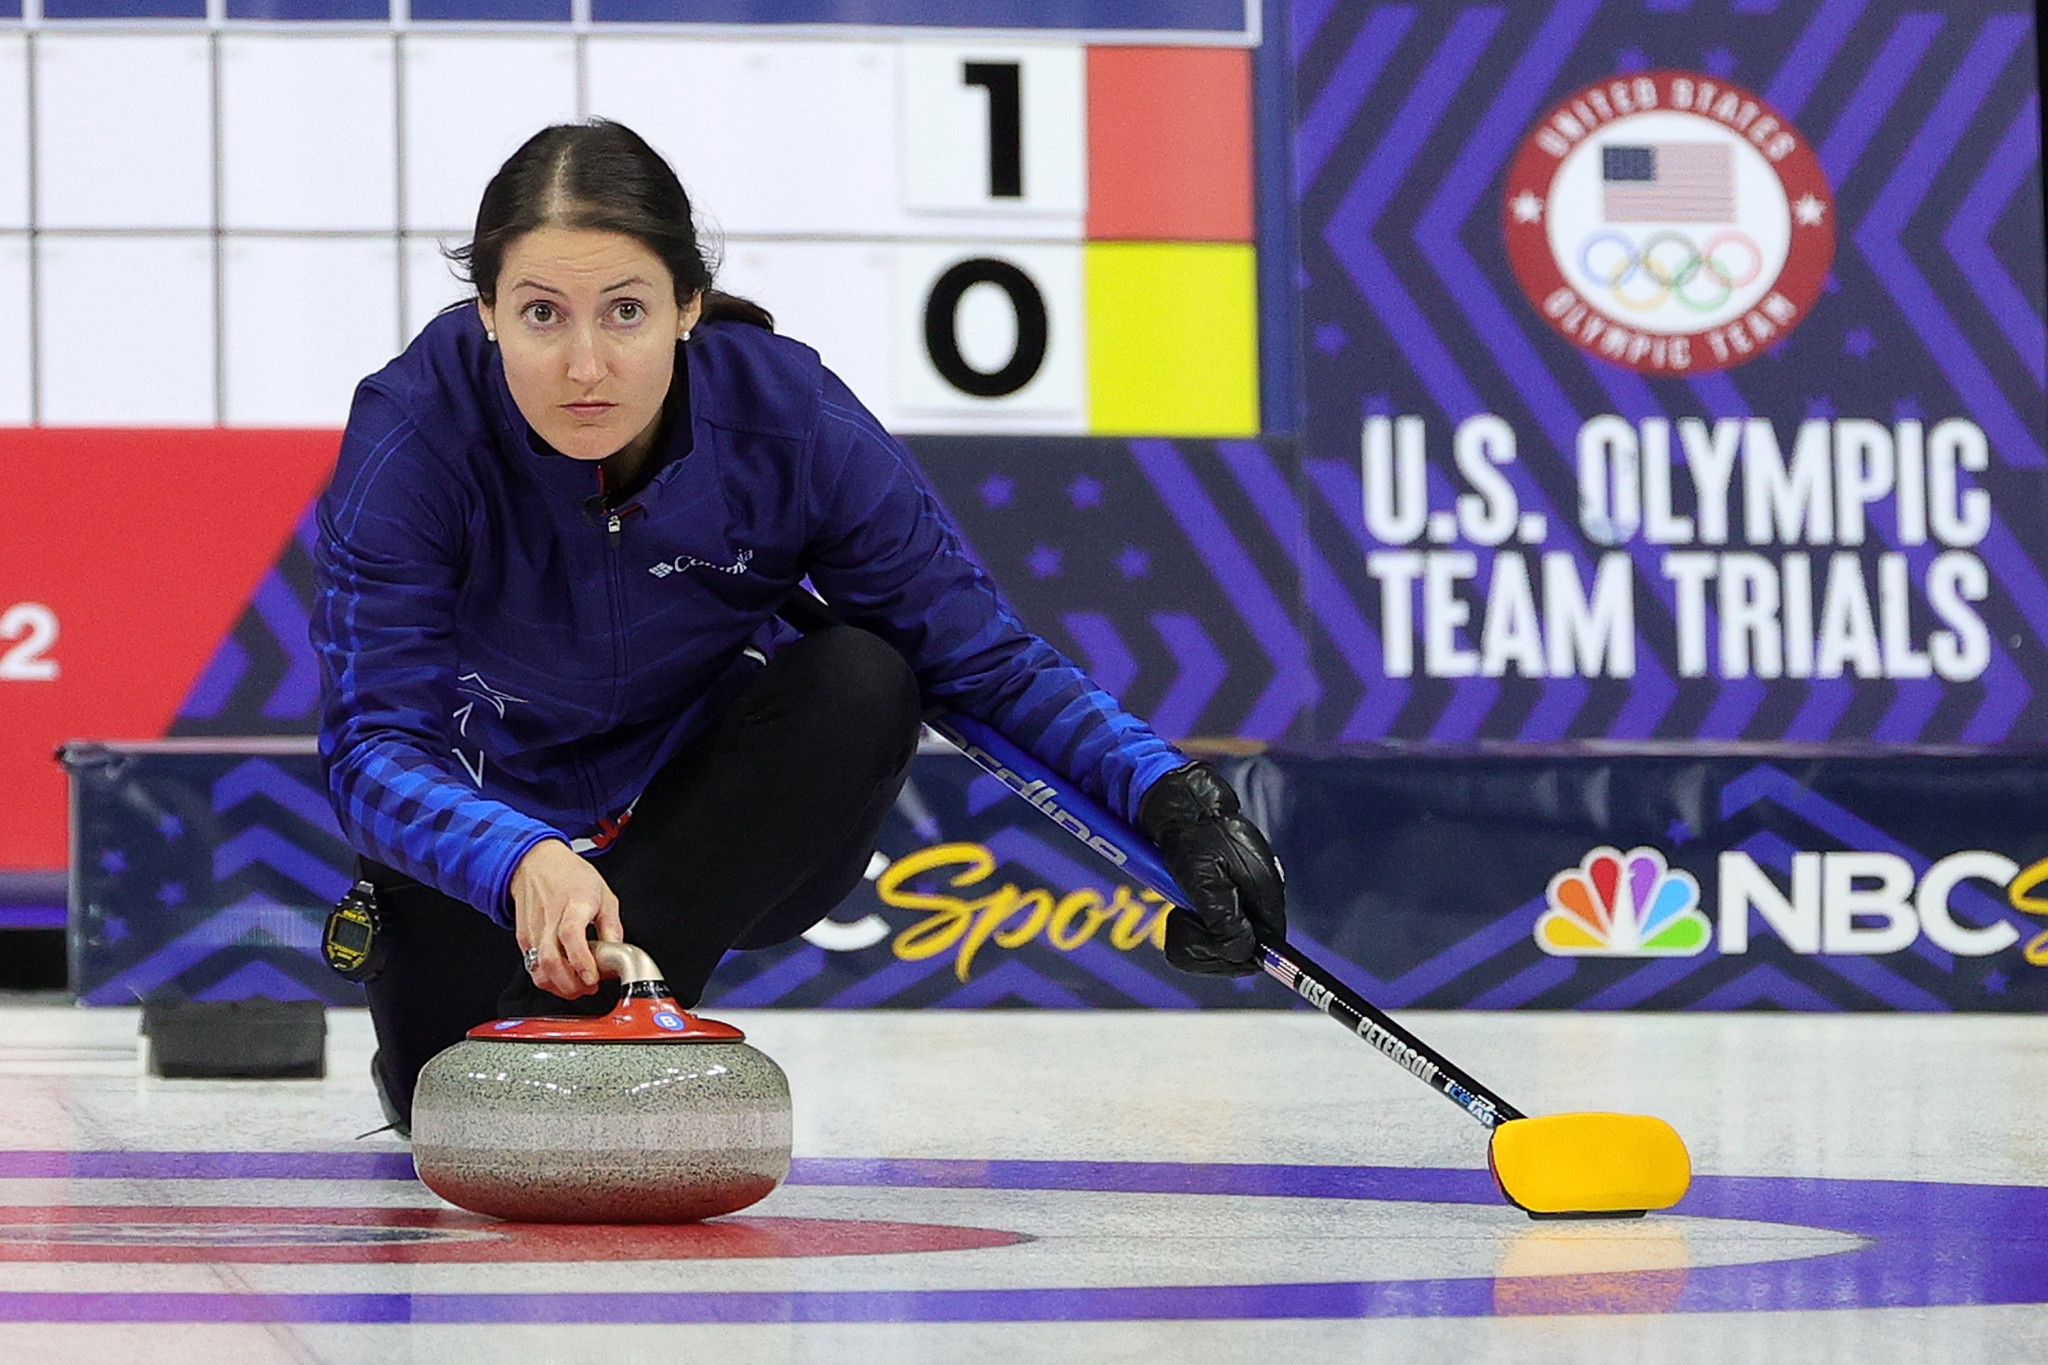 The event was due to act as a qualifier for the World Mixed Doubles Curling Championship 2022, which the United States have already qualified for ©Getty Images